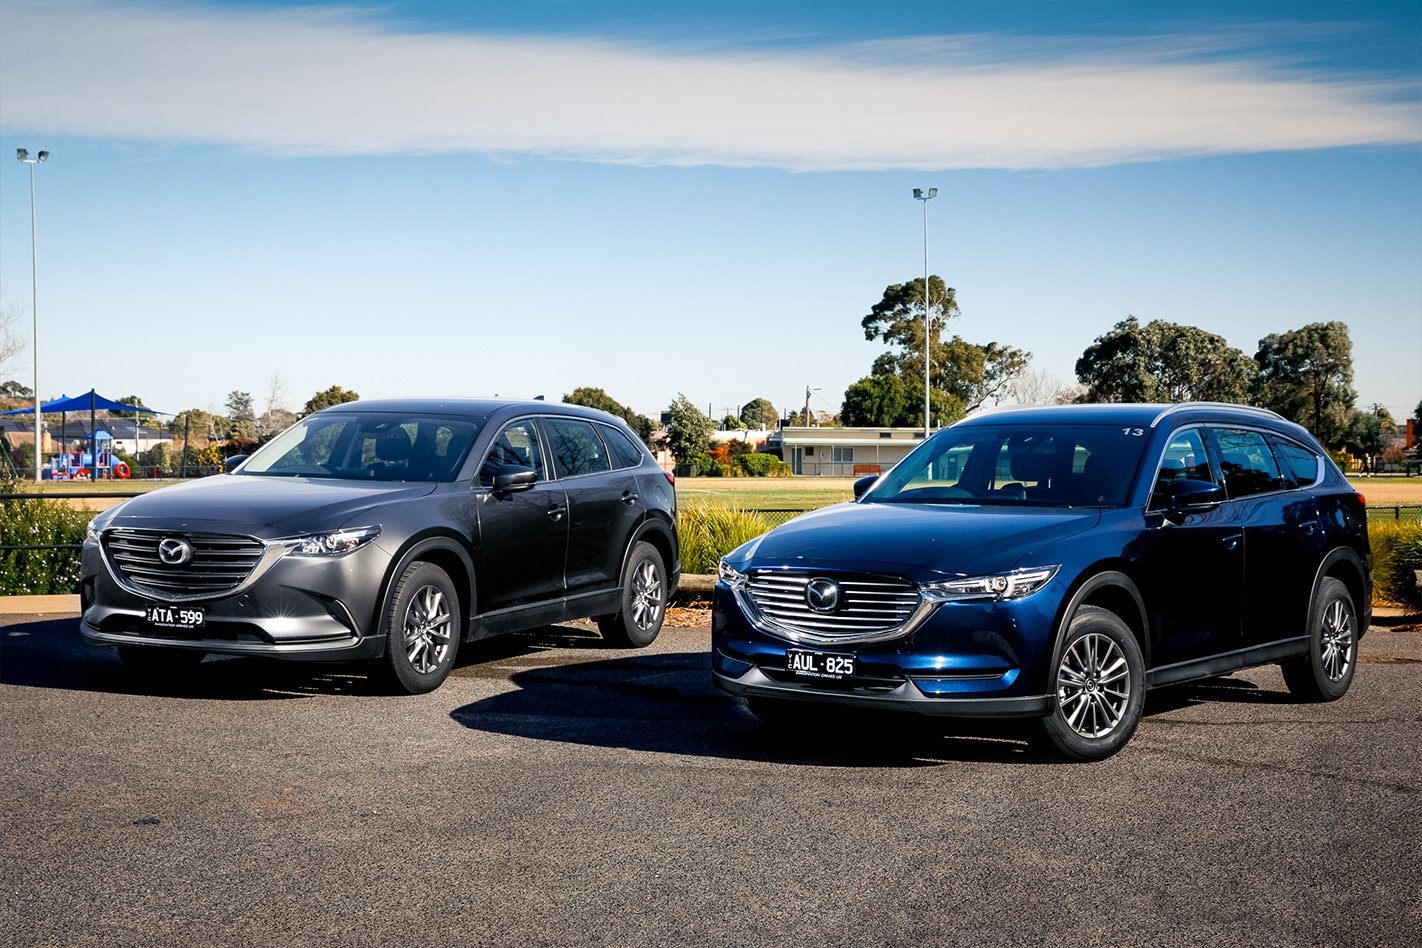 Mazda CX-8 vs CX-9: What's the difference?